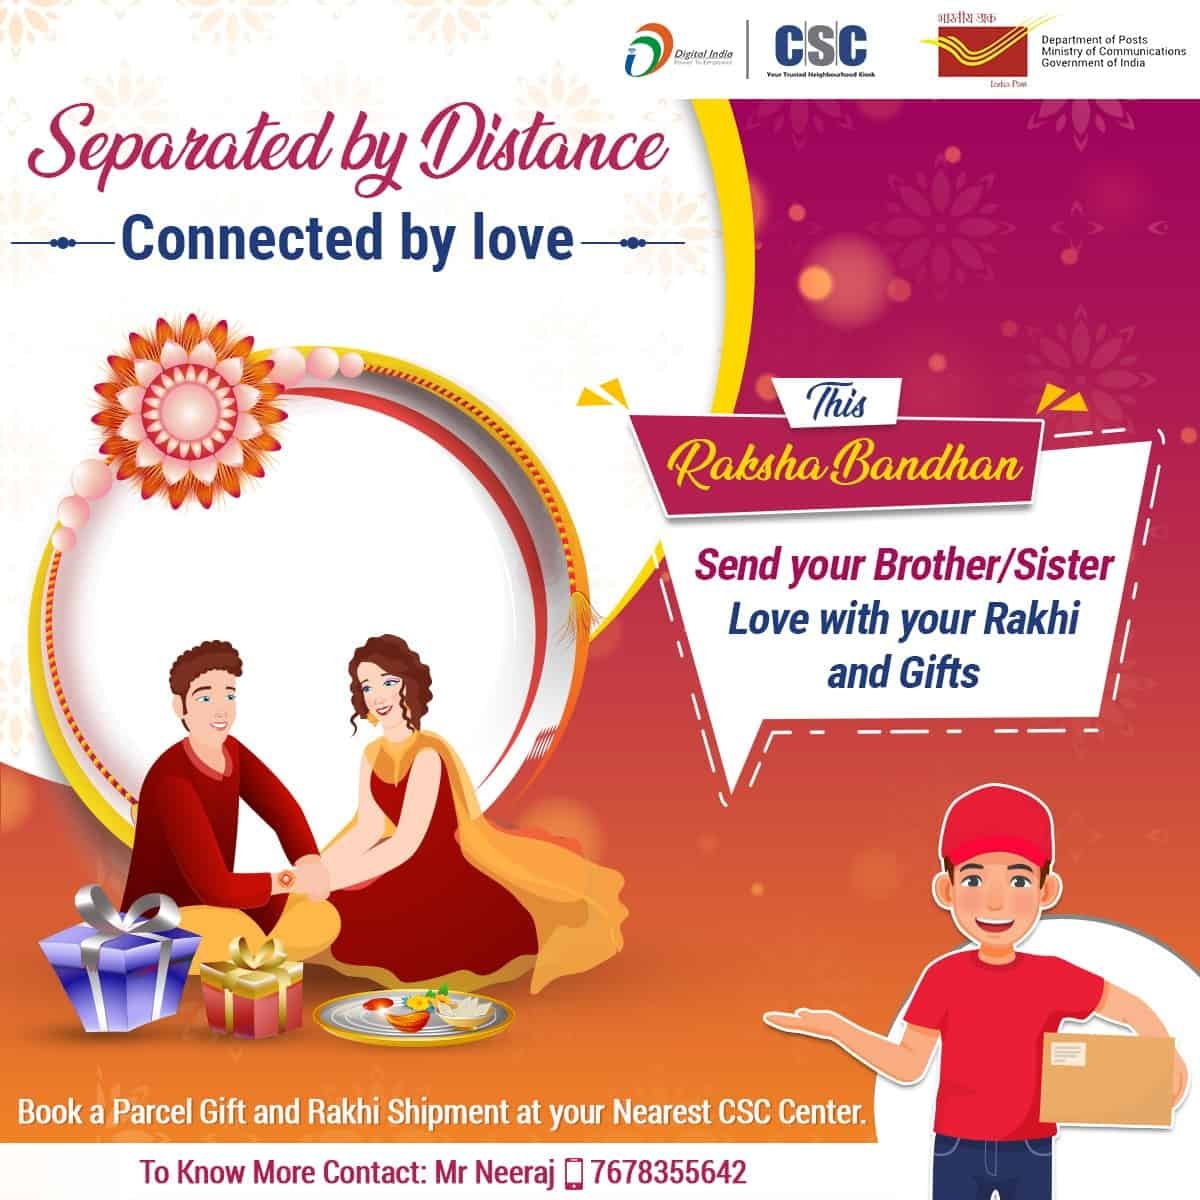 Book a Parcel Gift and Rakhi Shipment at your Nearest CSC center